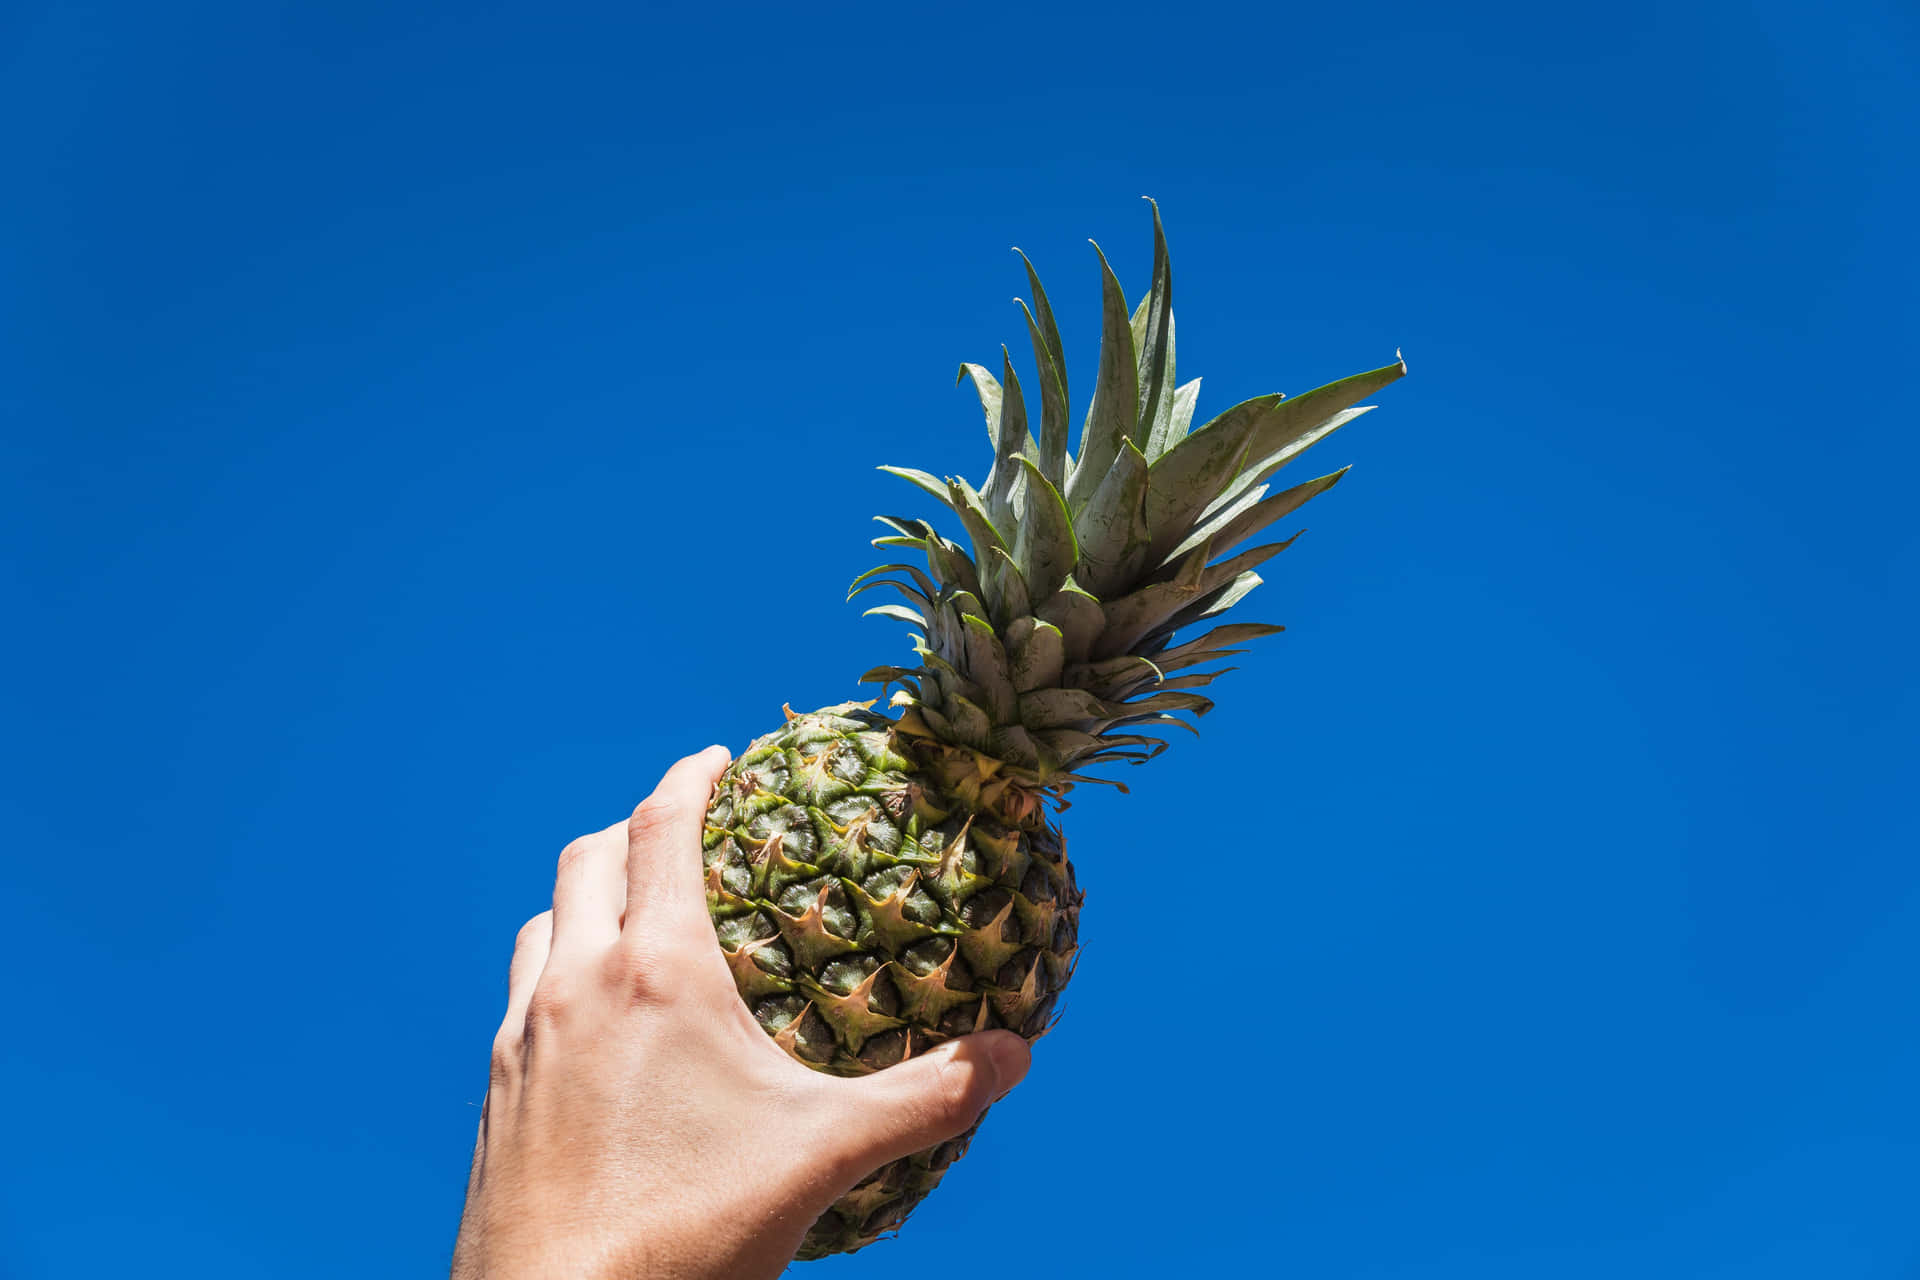 A tropical Pineapple against a vibrant background